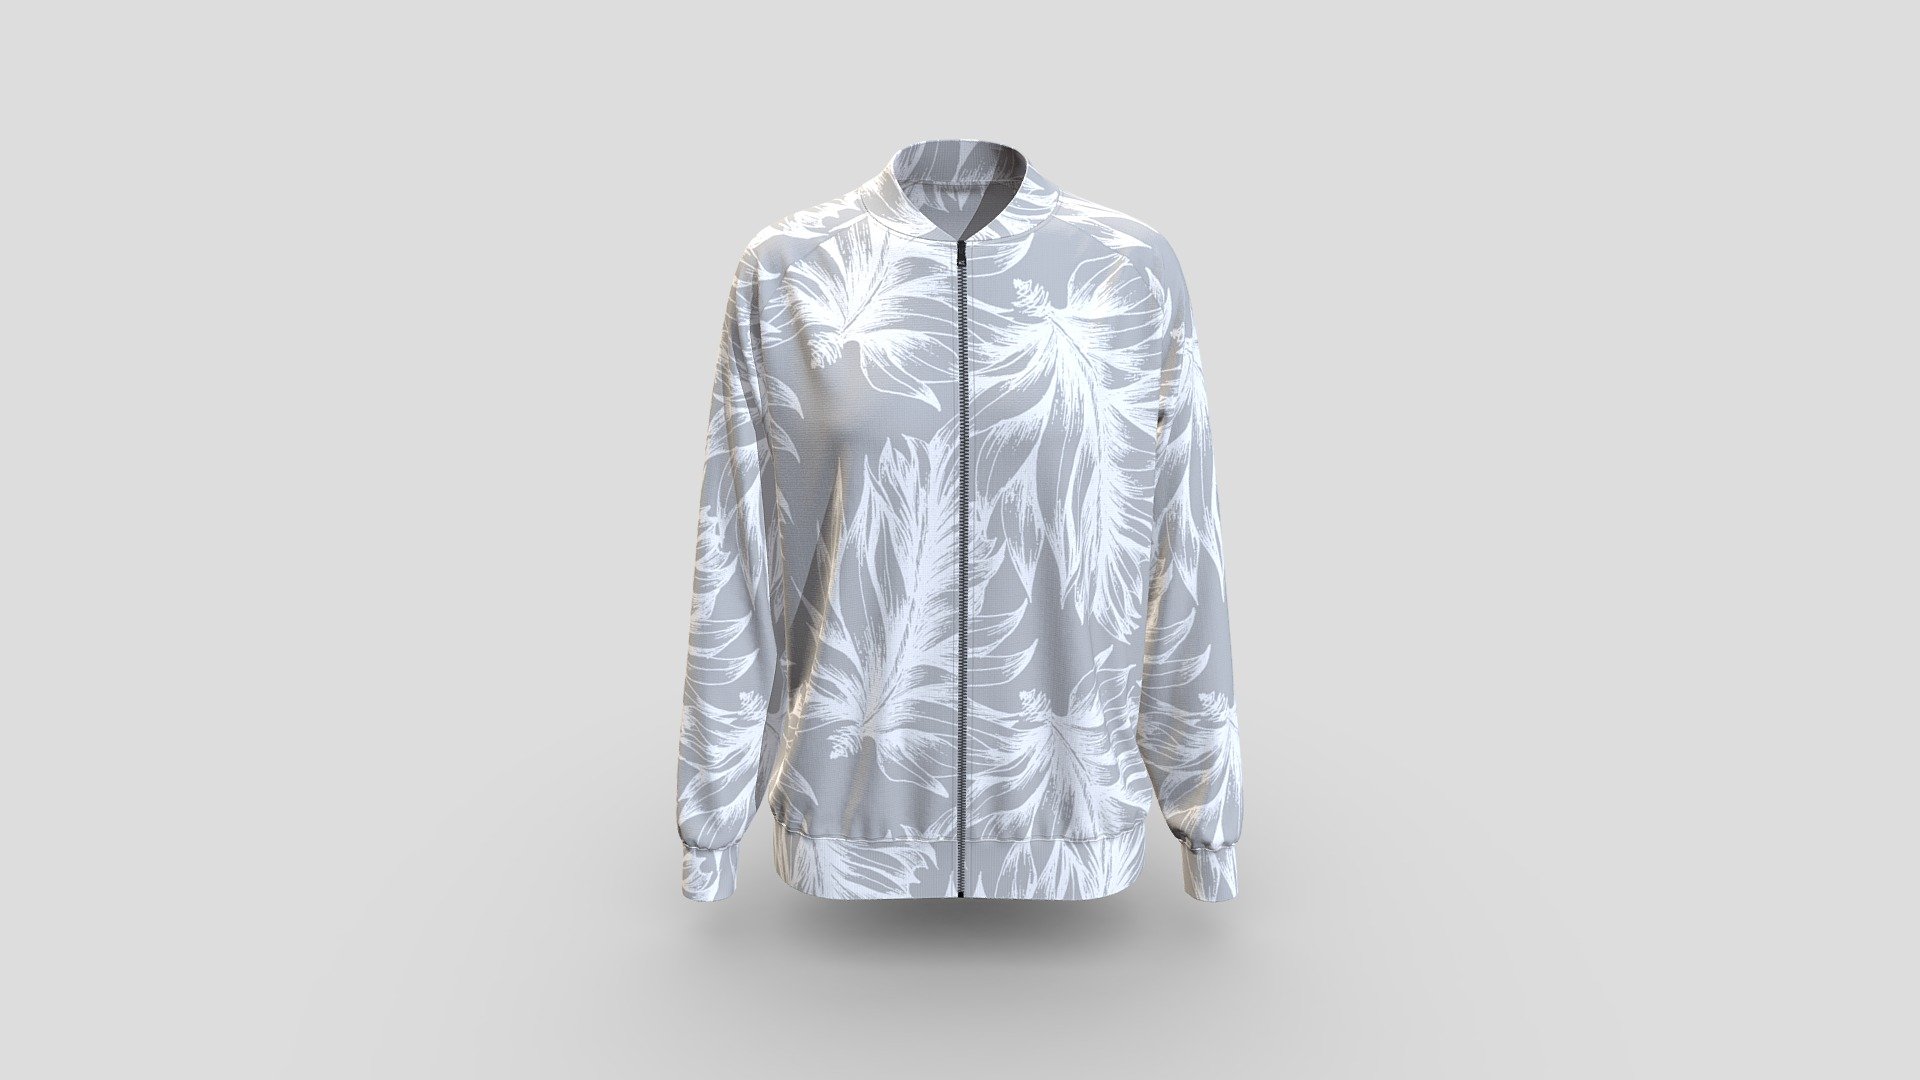 Cloth Title = Jacket Design 

SKU = DG100210 

Category = Women 

Product Type = Jacket 

Cloth Length = Long 

Body Fit = Loose Fit 

Occasion = Outerwear 

Sleeve Style = Long Sleeve 


Our Services:

3D Apparel Design.

OBJ,FBX,GLTF Making with High/Low Poly.

Fabric Digitalization.

Mockup making.

3D Teck Pack.

Pattern Making.

2D Illustration.

Cloth Animation and 360 Spin Video.


Contact us:- 

Email: info@digitalfashionwear.com 

Website: https://digitalfashionwear.com 


We designed all the types of cloth specially focused on product visualization, e-commerce, fitting, and production. 

We will design: 

T-shirts 

Polo shirts 

Hoodies 

Sweatshirt 

Jackets 

Shirts 

TankTops 

Trousers 

Bras 

Underwear 

Blazer 

Aprons 

Leggings 

and All Fashion items. 





Our goal is to make sure what we provide you, meets your demand 3d model